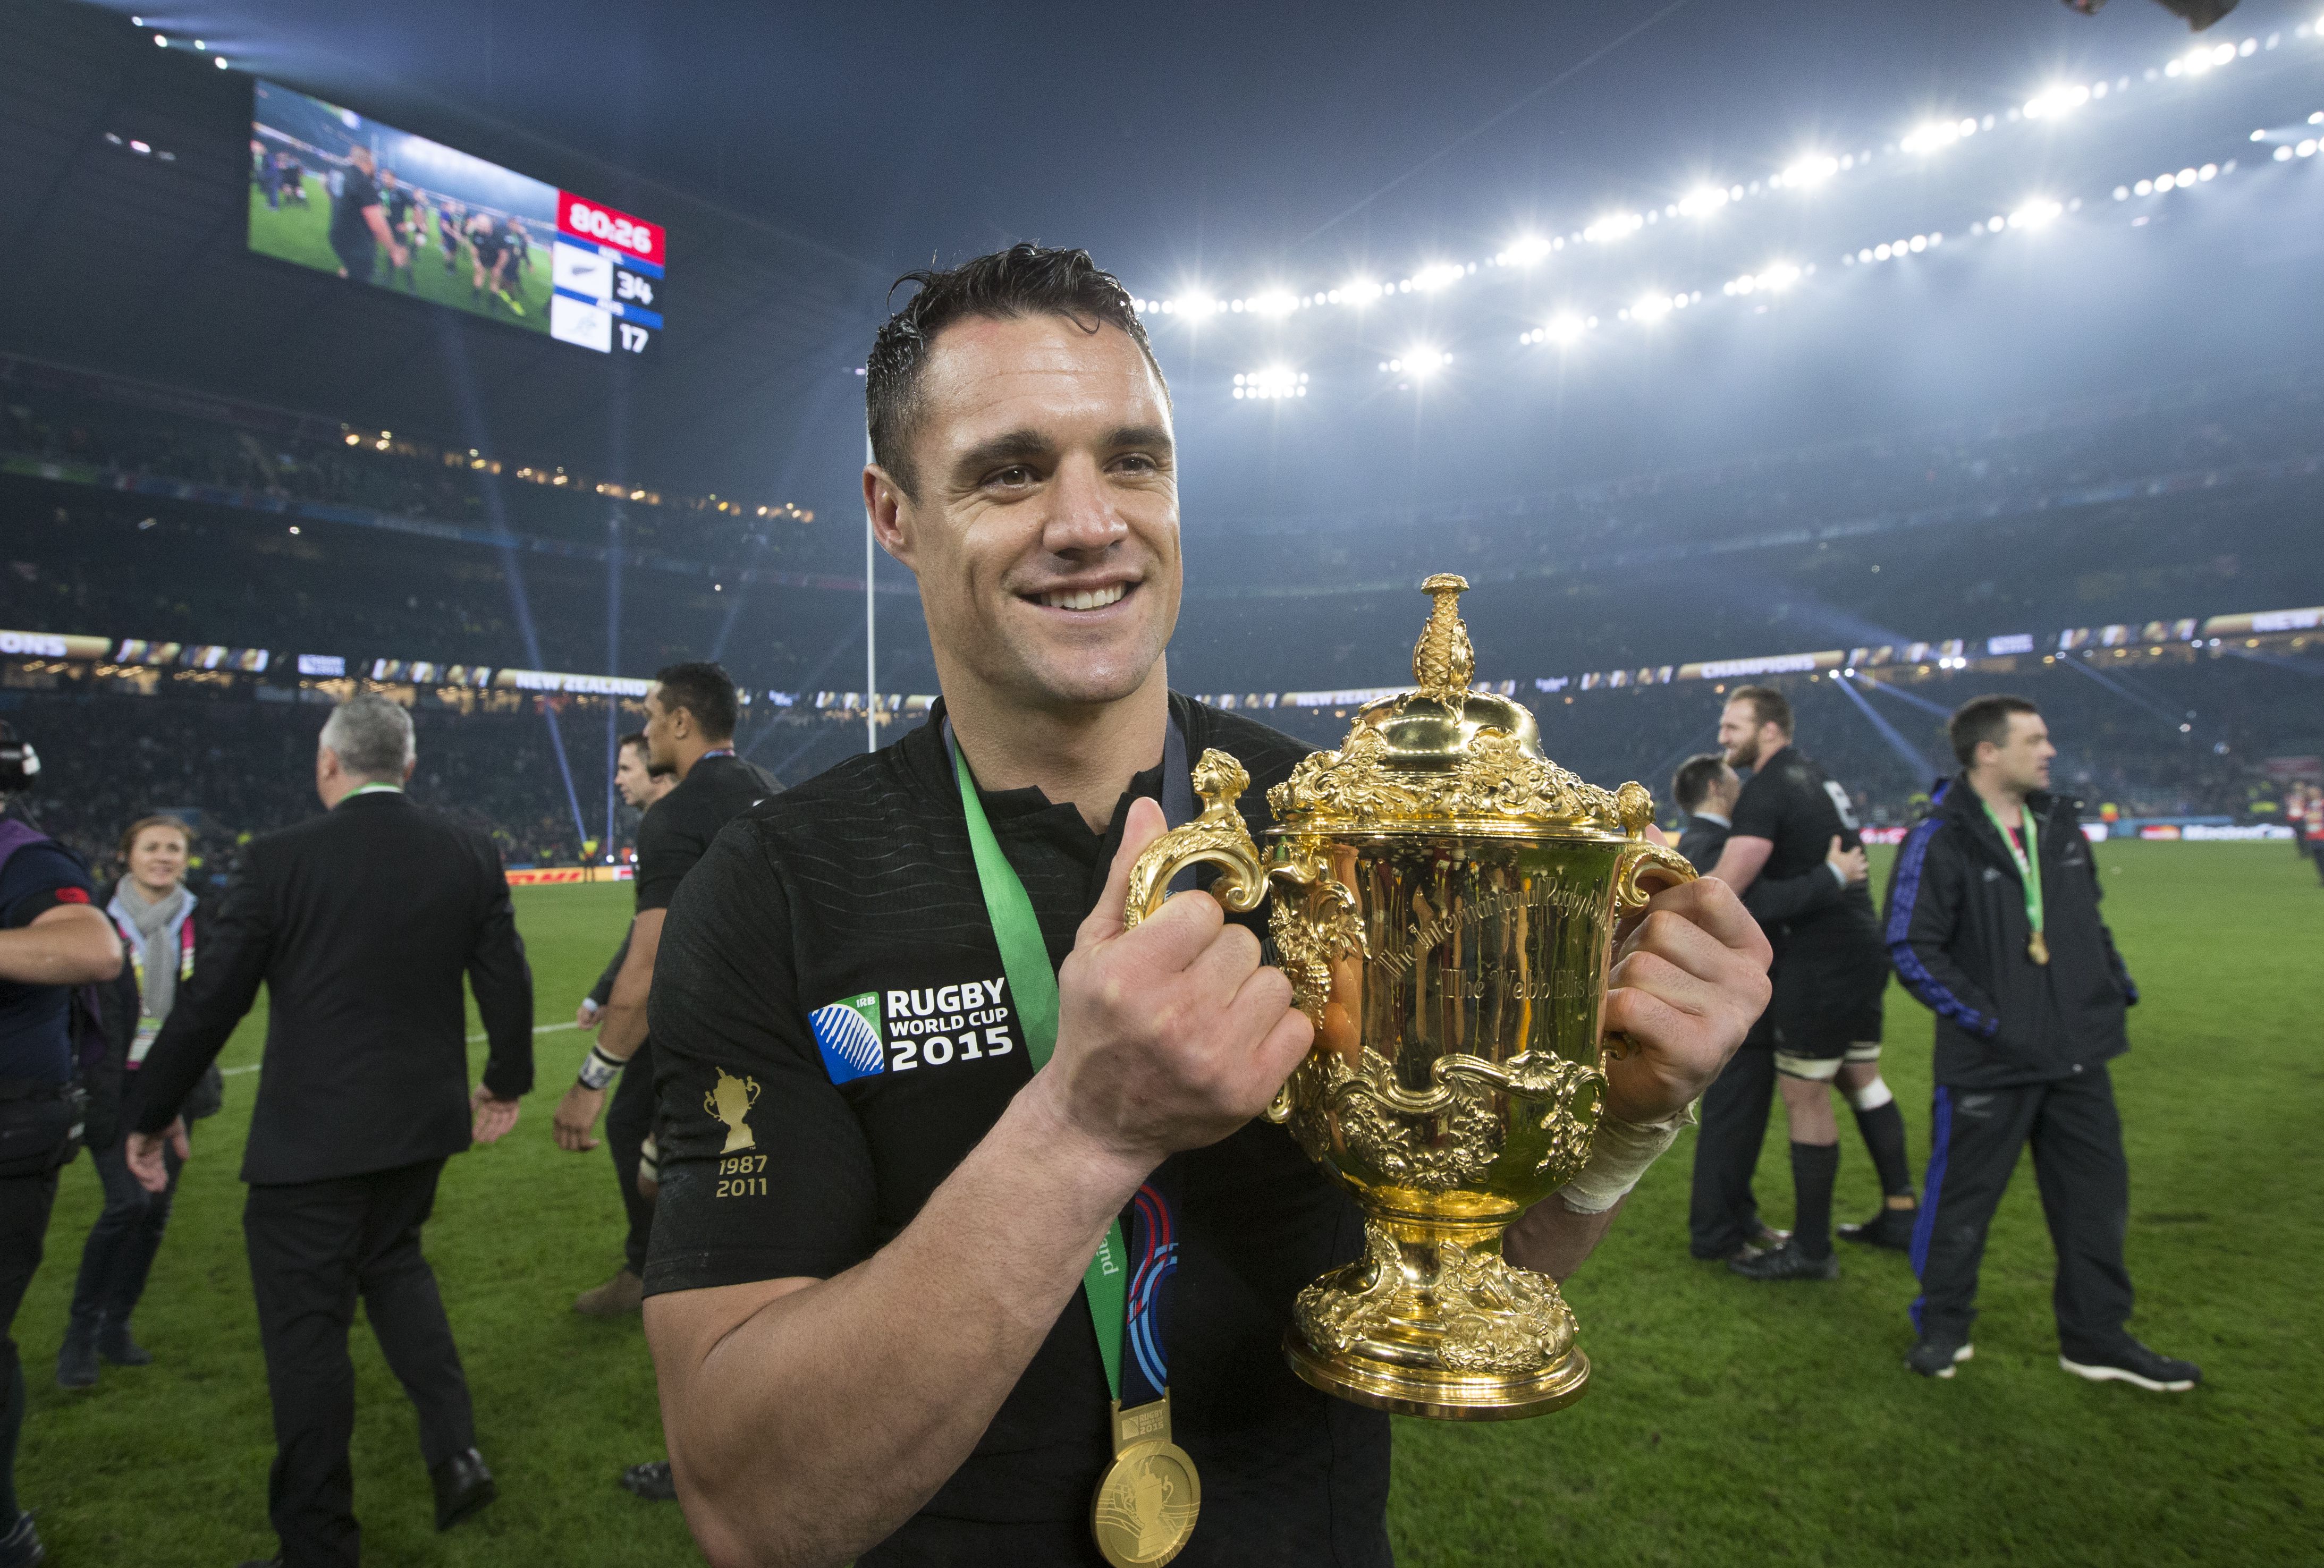 Off The Posts: Dan Carter gets over his 'fear' of retirement in new  documentary - NZ Herald